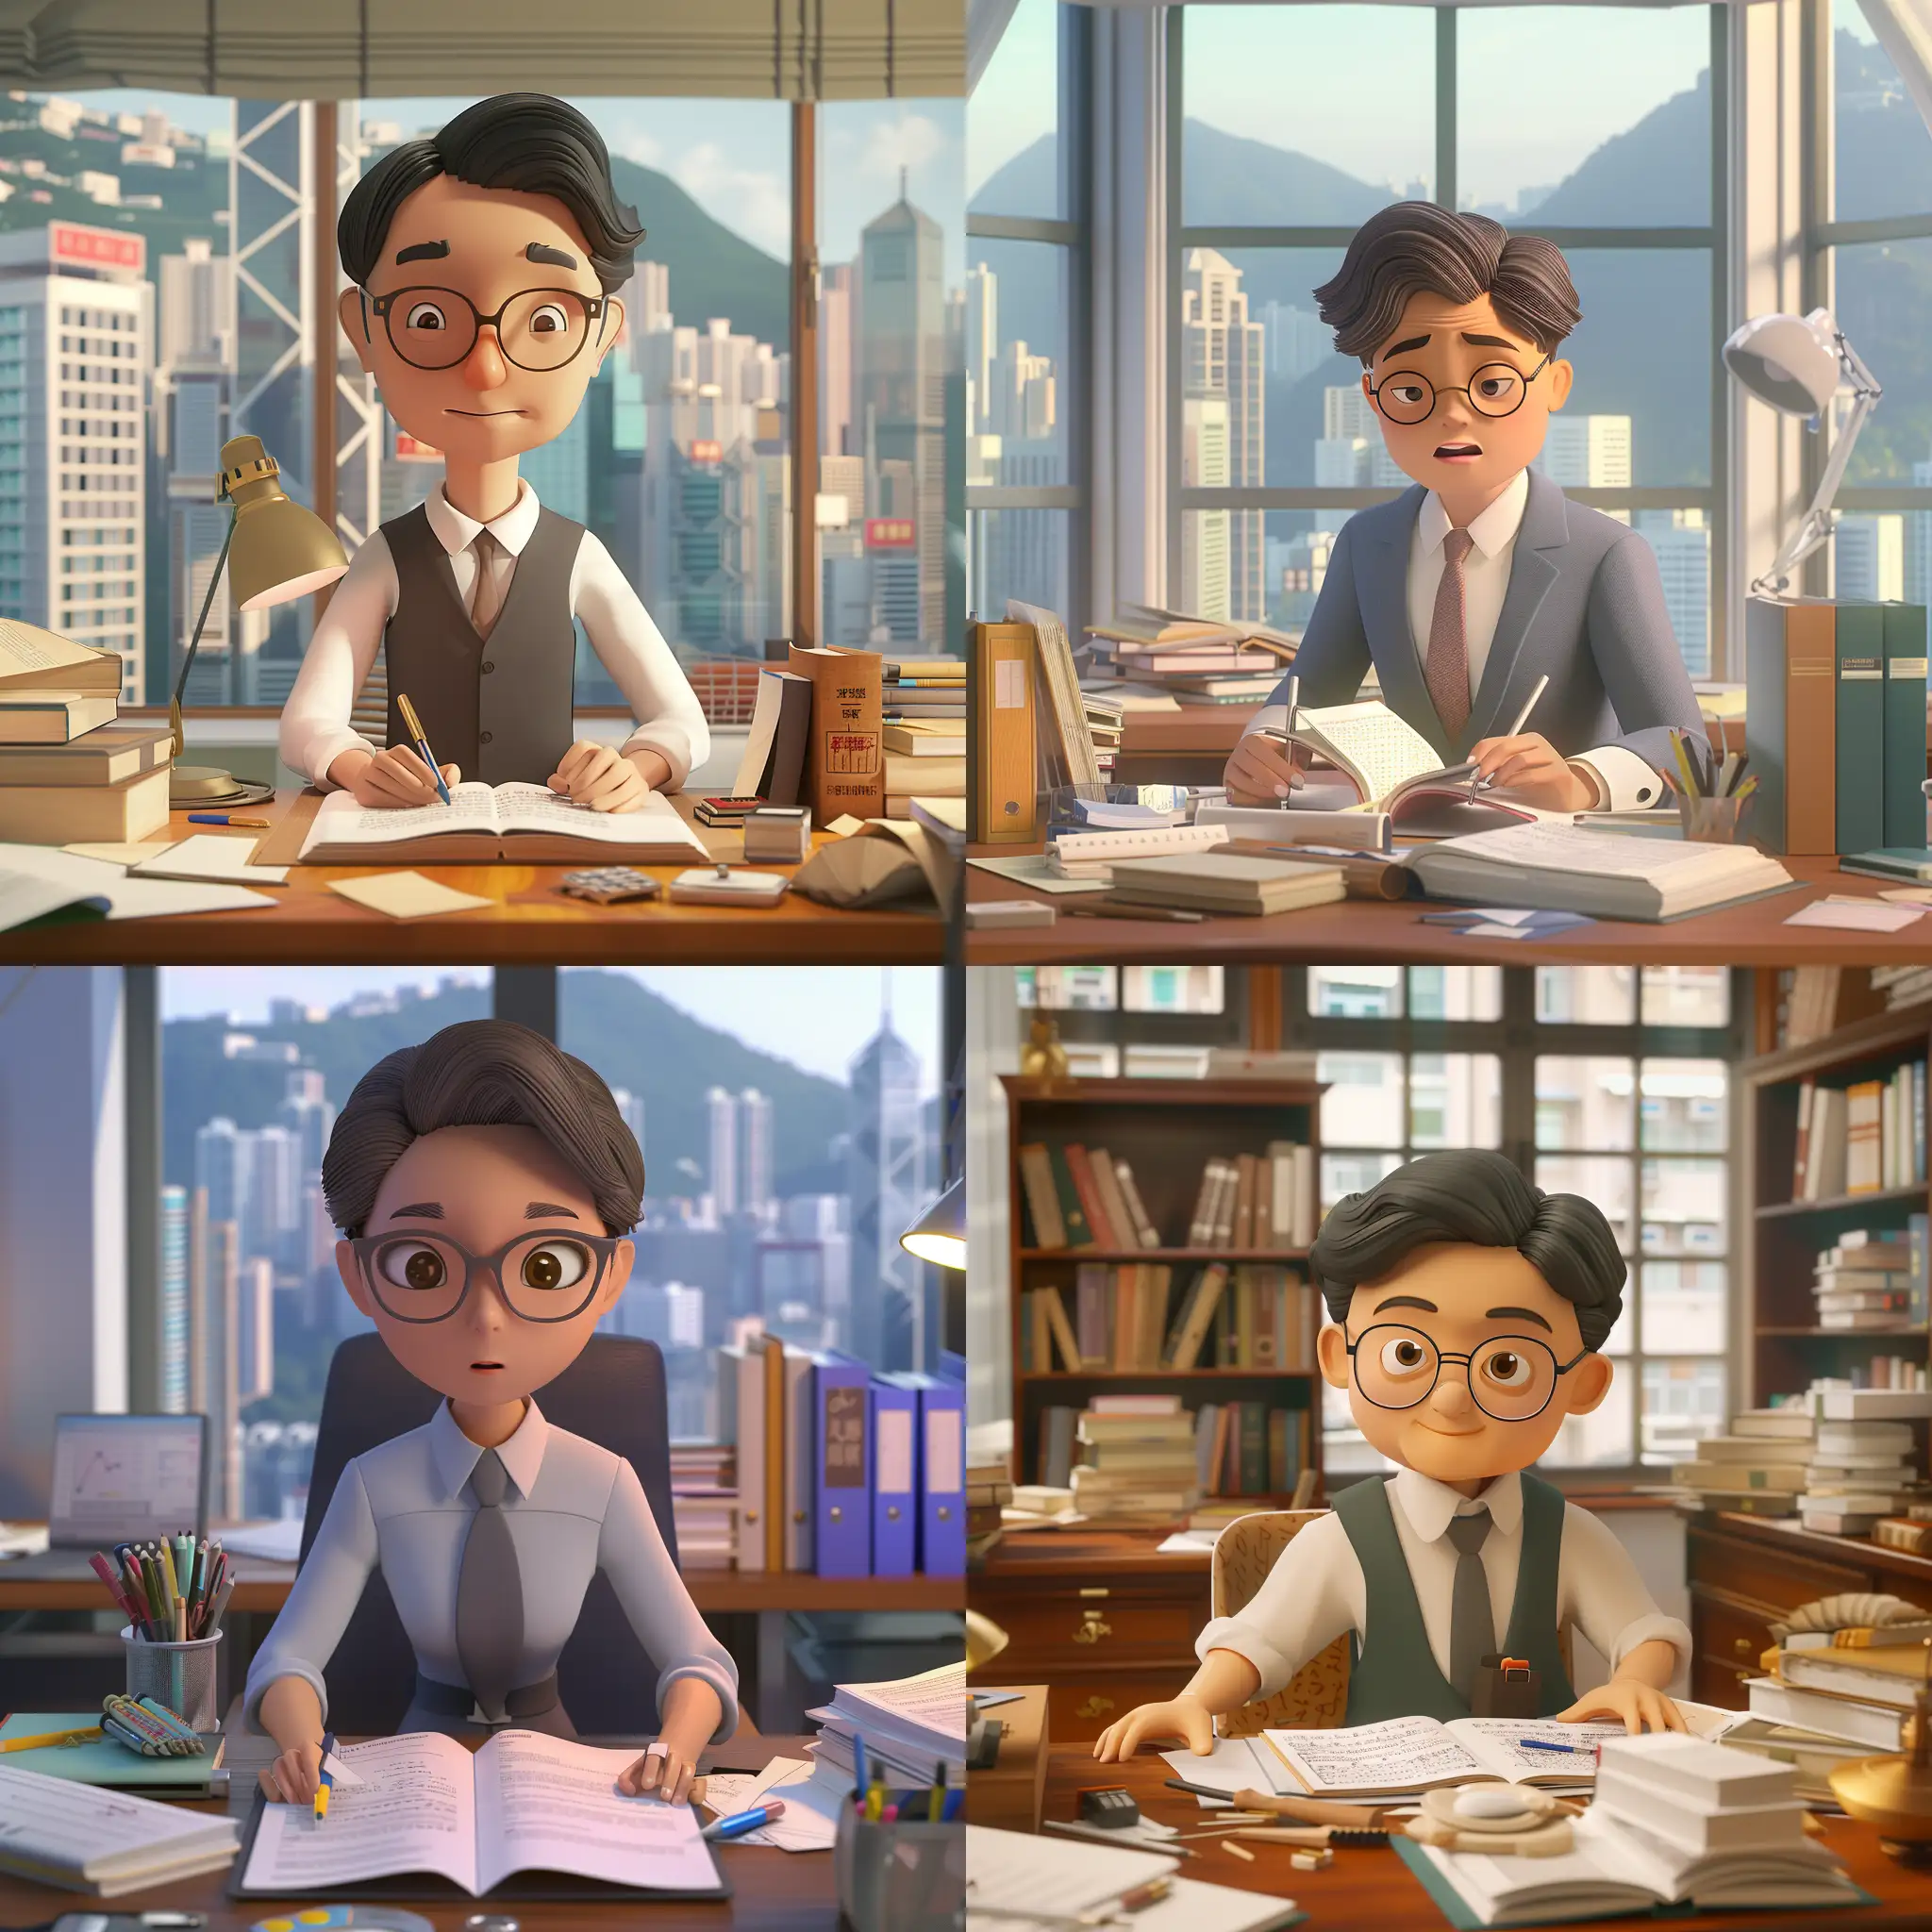 Create a 3D animated character of a proofreader, attentively working in a well-lit office space in Hong Kong, with cartoon-like features and human-like proportions maintaining the style of the provided reference. The character should display a detail-oriented and focused expression, surrounded by manuscripts, reference books, and proofreading tools. Integrate shades close to #2563eb into the color palette to convey a sense of calm and concentration appropriate for the proofreading profession.
